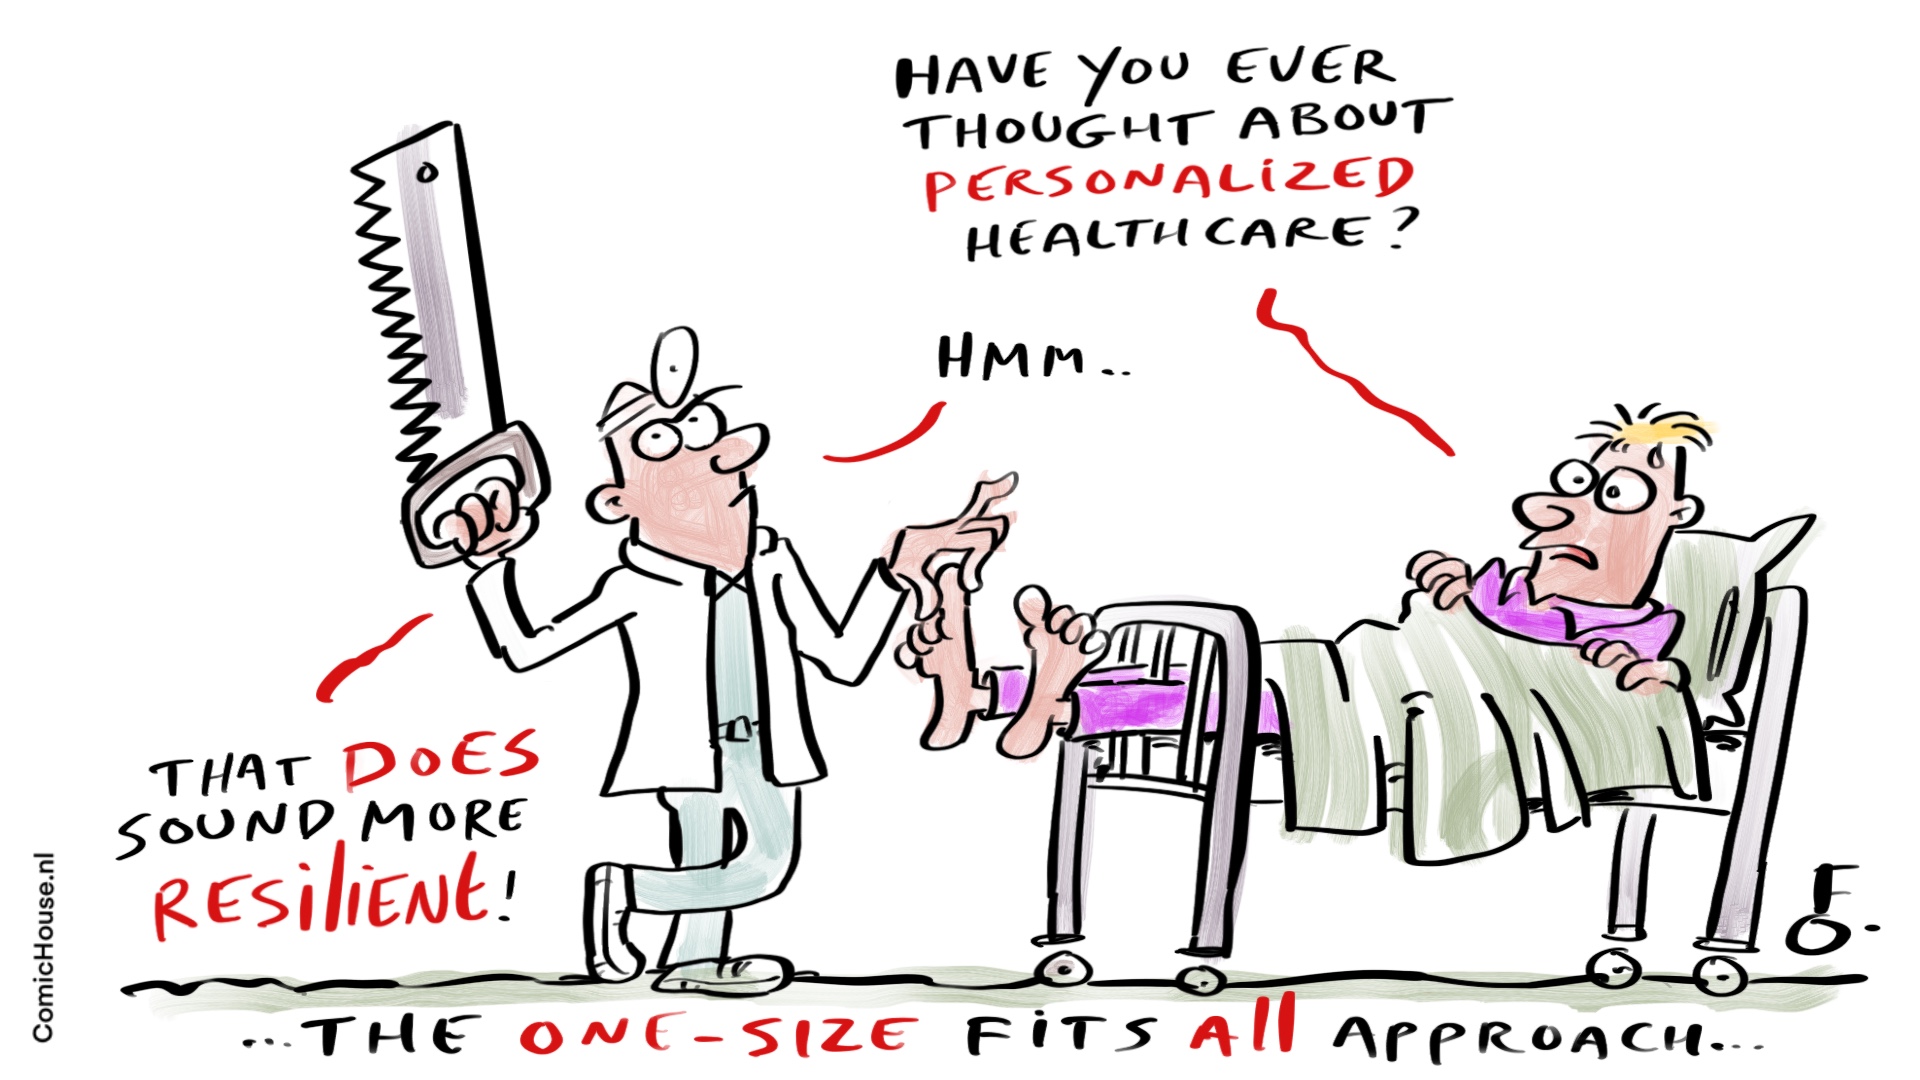 FutureProofing Healthcare - One size fits all? Personalised healthcare is vital